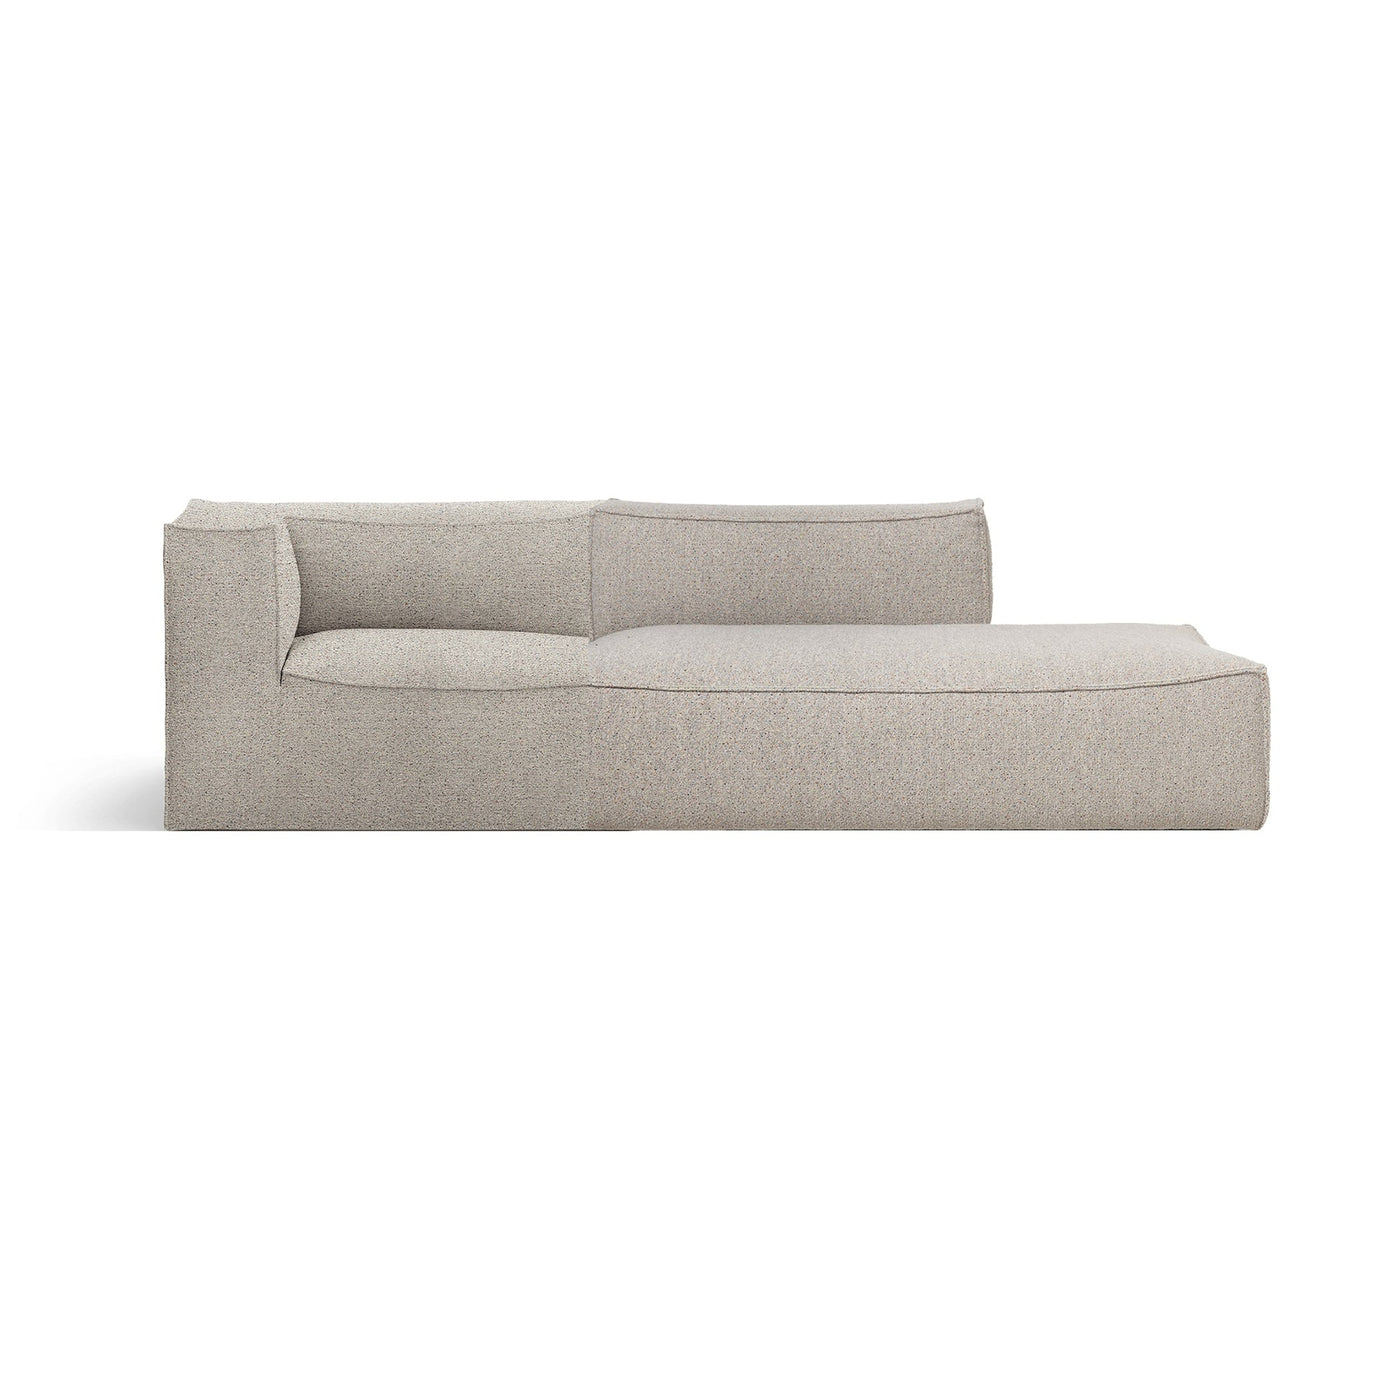 Ferm LIVING Catena Modular 2 Seater Sofa. Made to order at someday designs #colour_light-grey-confetti-boucle